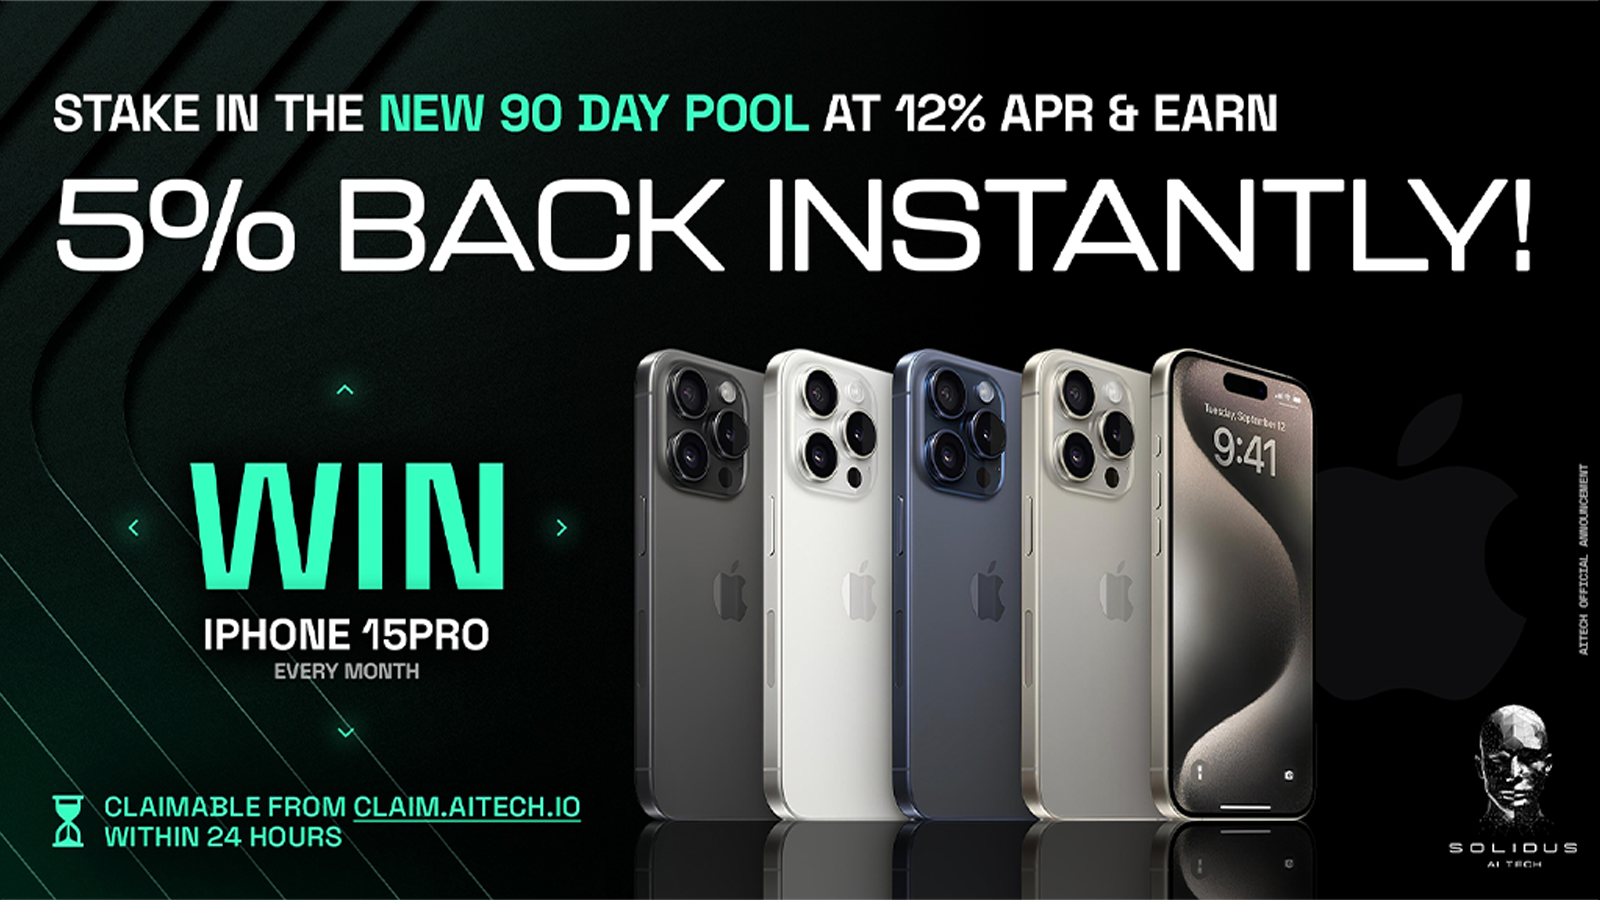 AITECH iPhone Giveaway – Stake to Win!